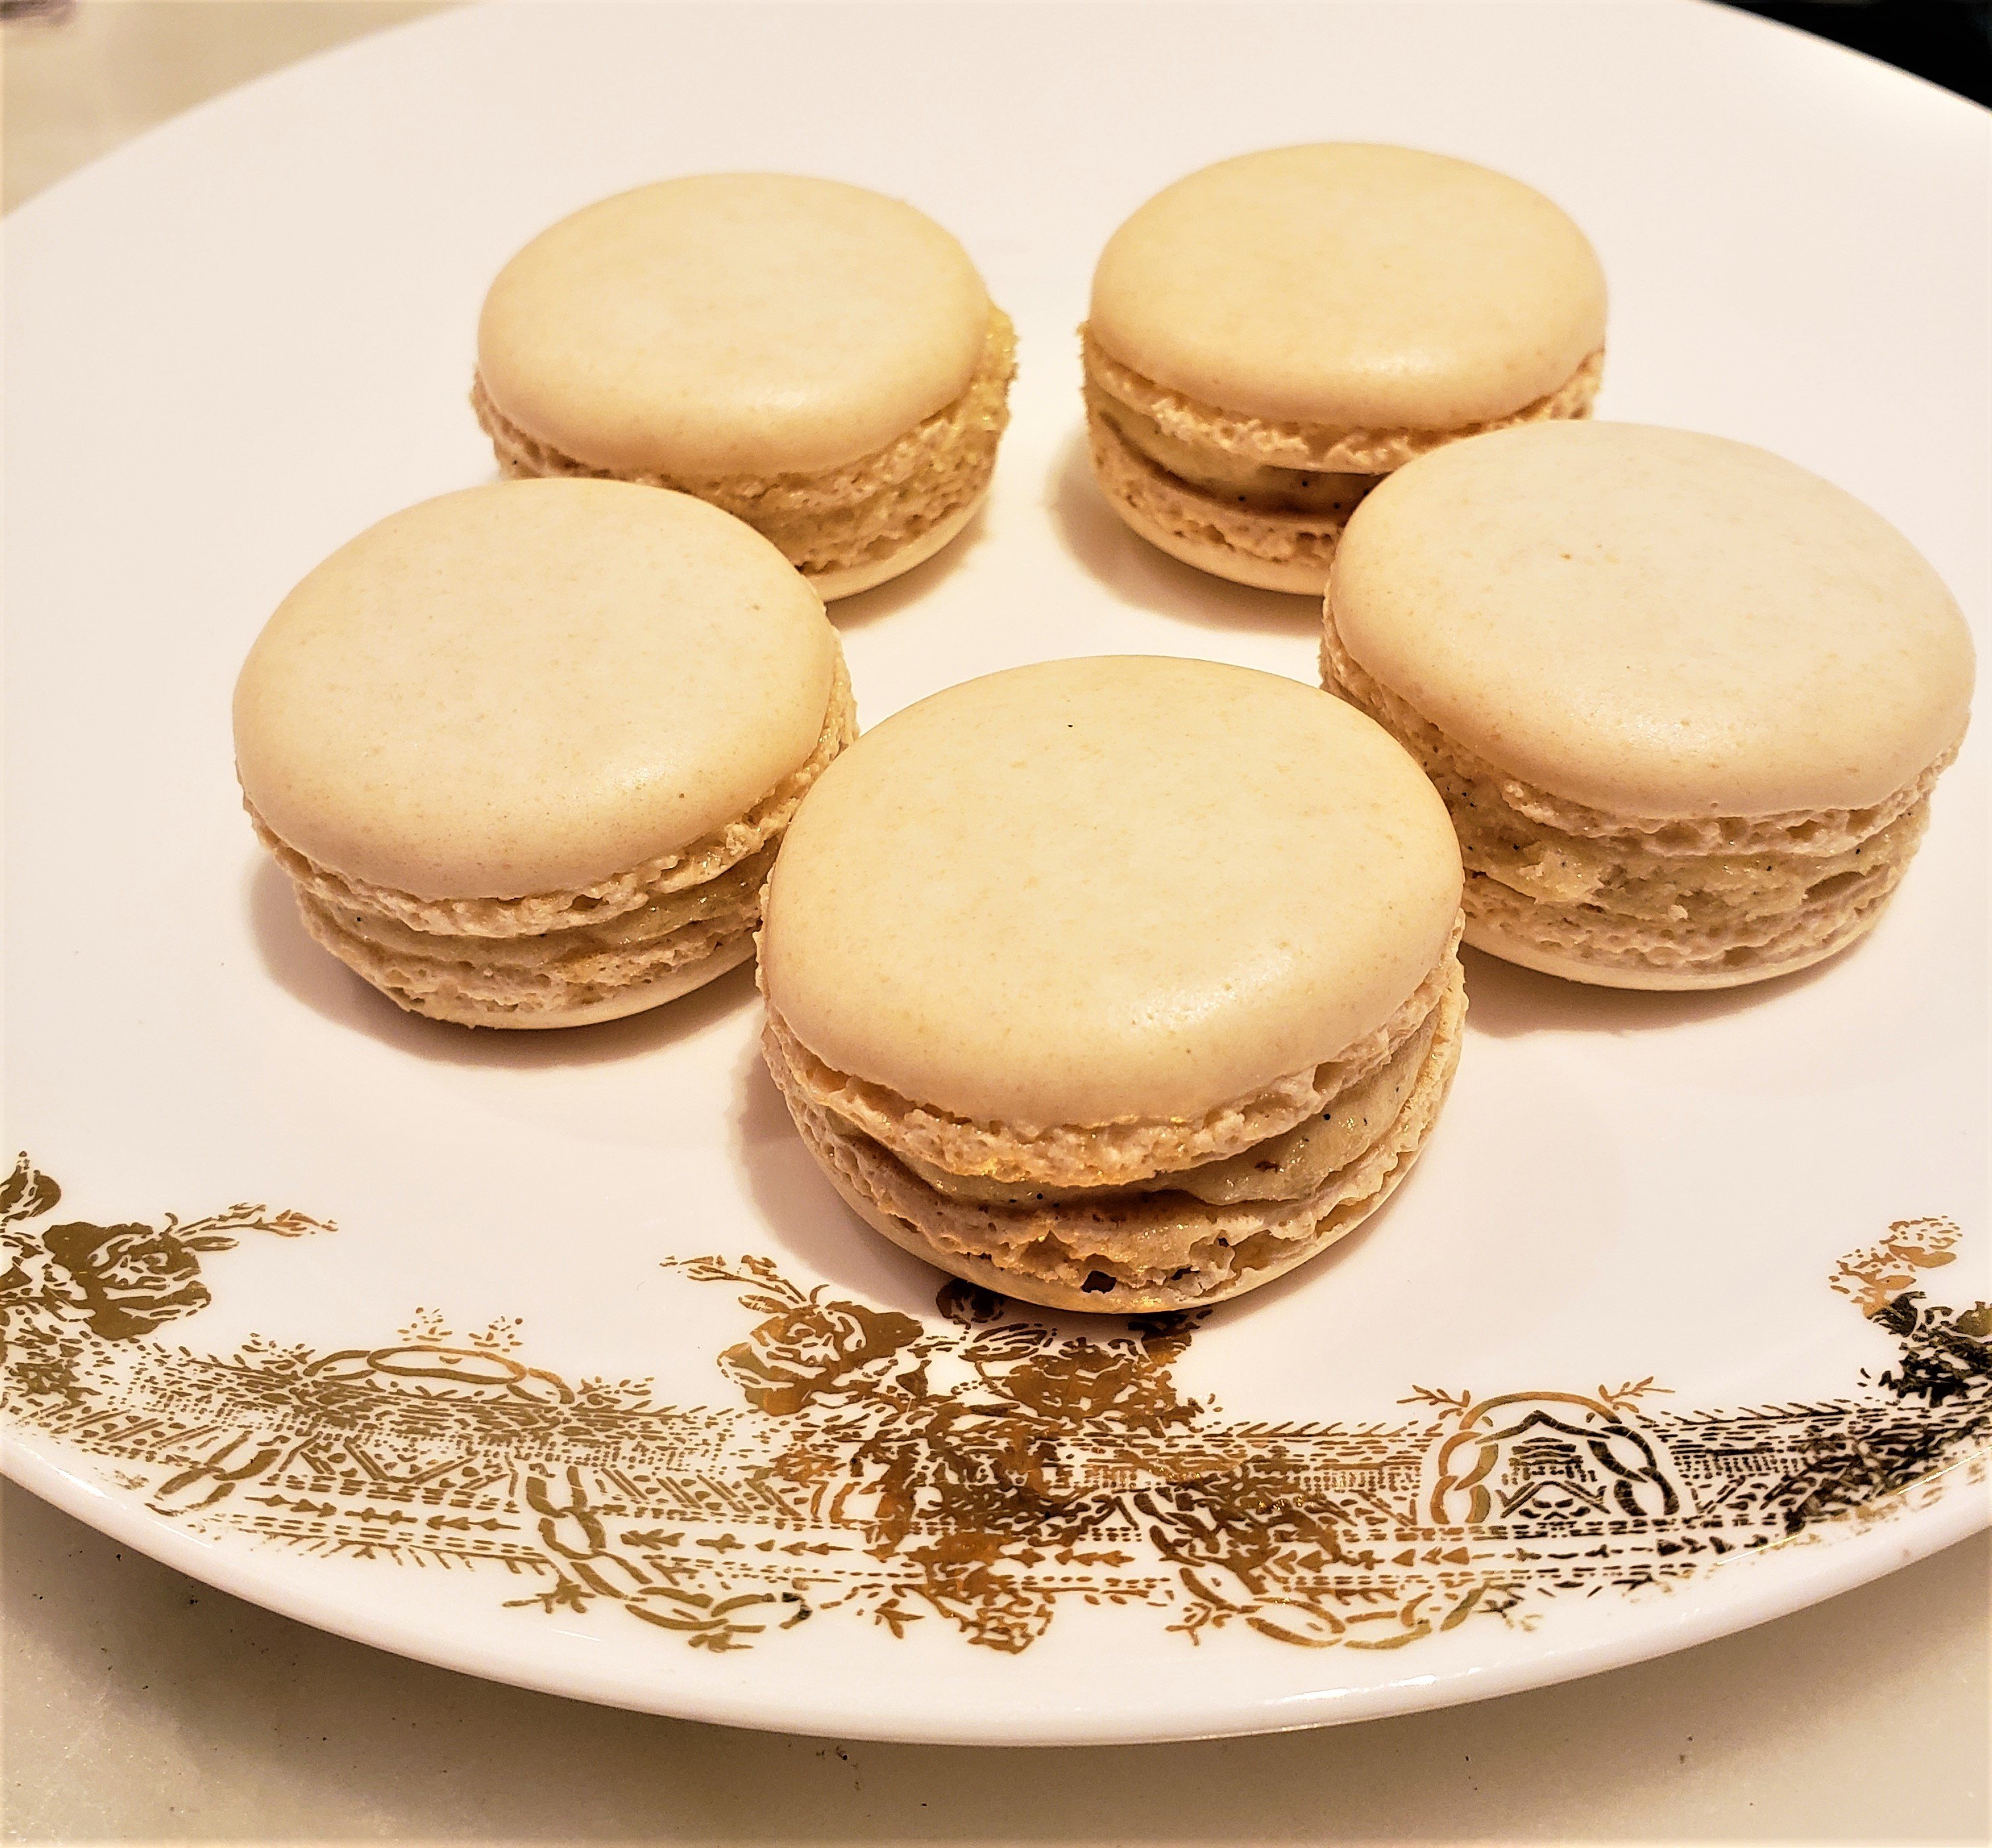 A plate of Madagascar vanilla macarons created by Ken Thomas, head pastry chef at DALLOYAU Paris, a French dessert coffee shop in Hong Kong. Photo: Aydee Tie